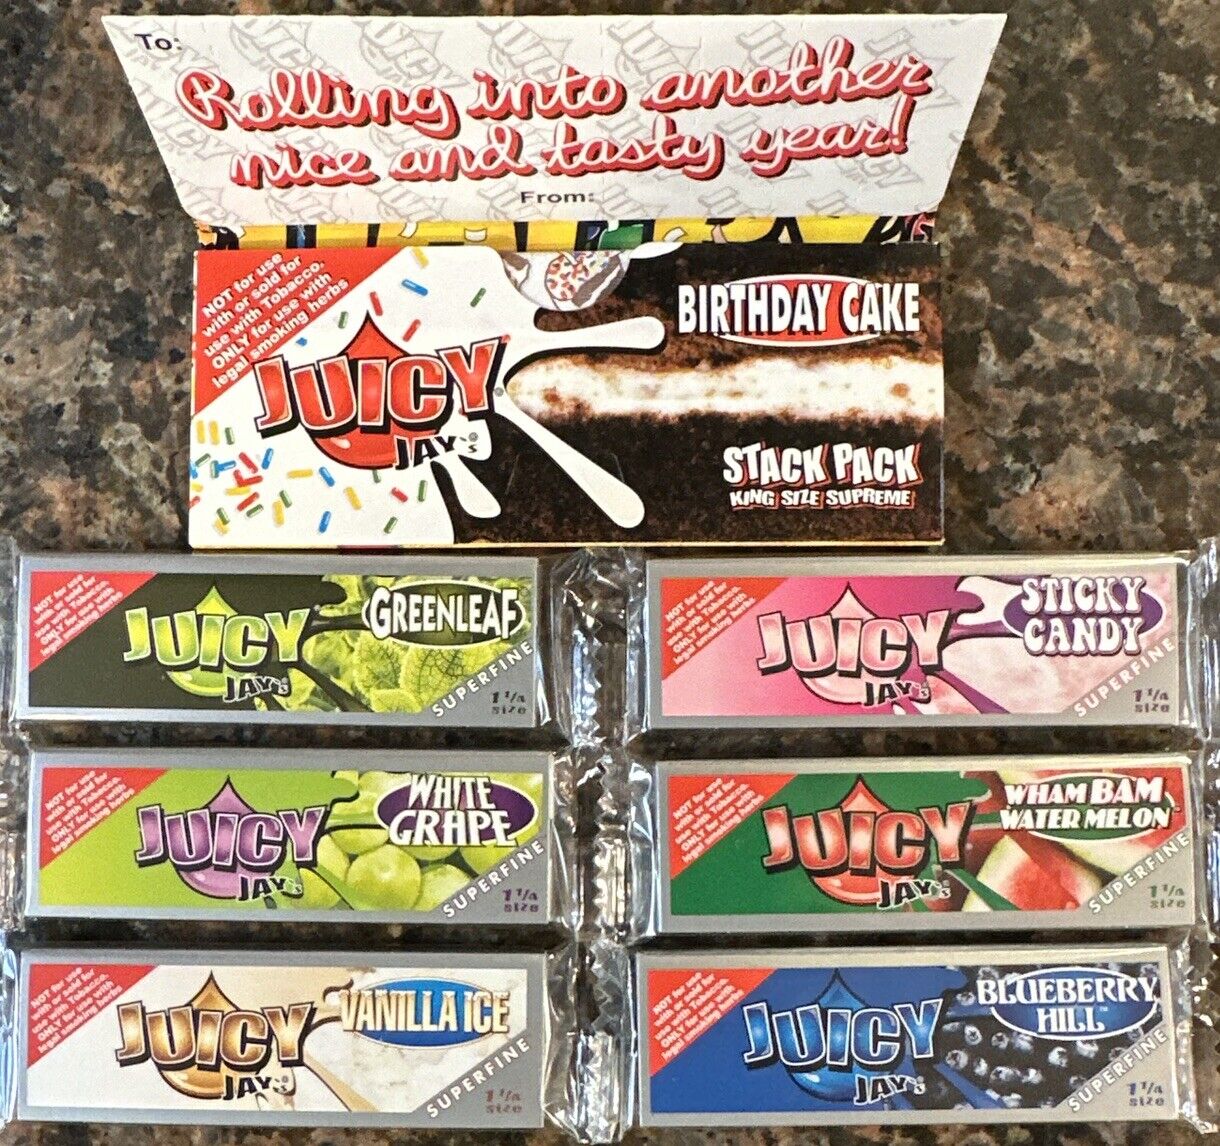 Juicy Jay’s 1 1/4 Rolling Papers Variety 6 PK Super Fine-1 PK King Birthday Cake